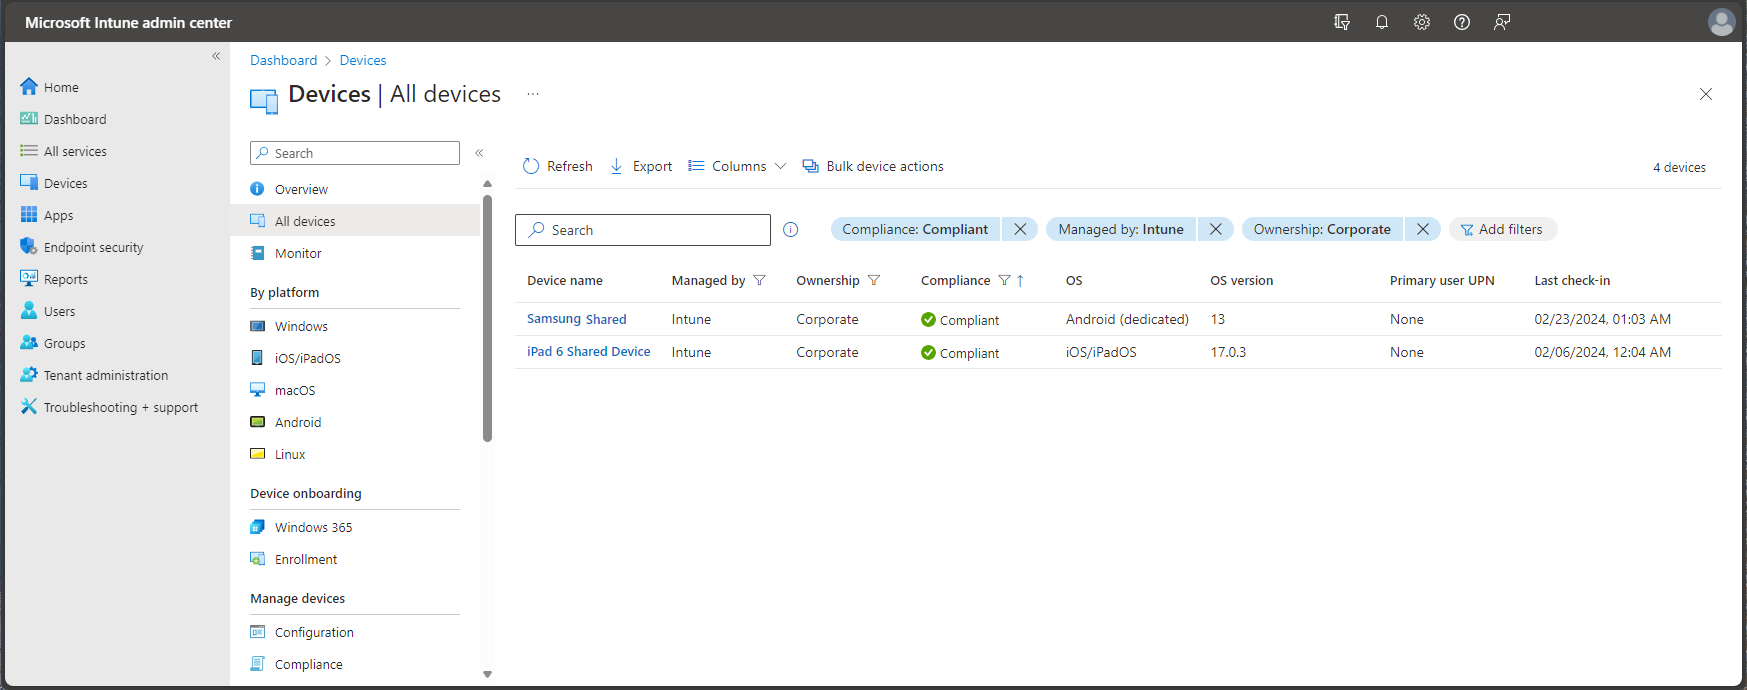 Screenshot of the Microsoft Intune admin center - All devices